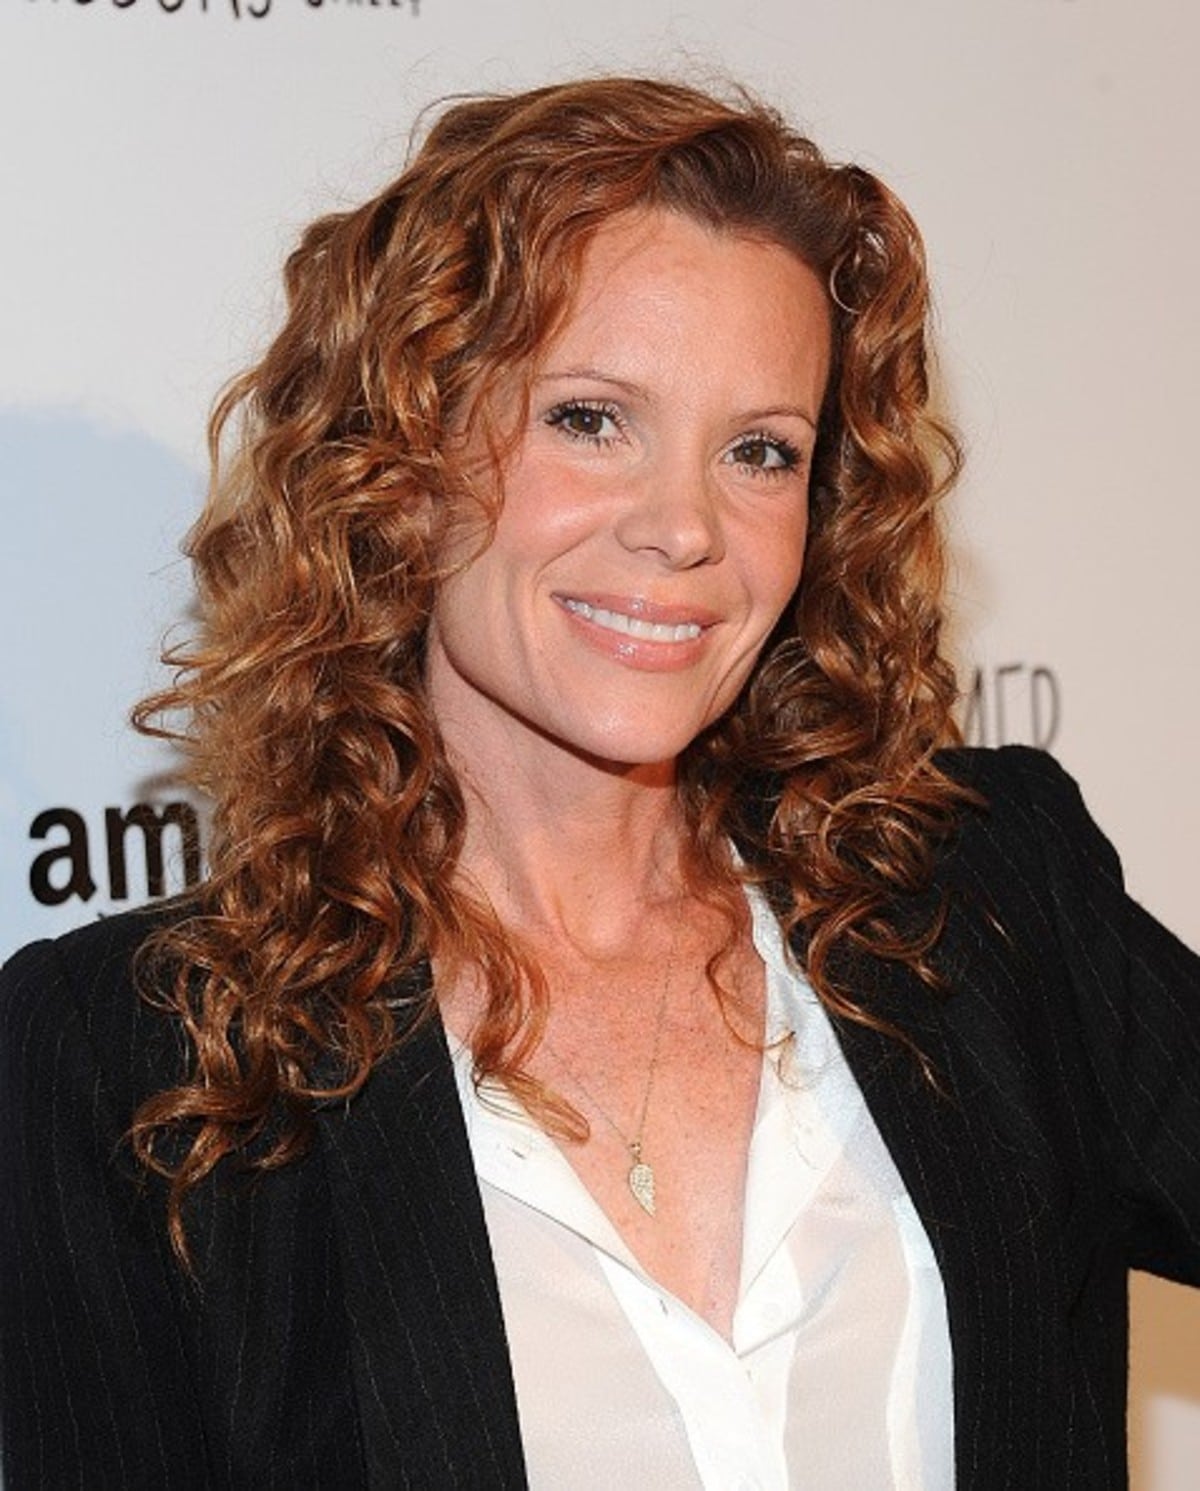 Robyn Lively was born in Powder Springs, Georgia, United States. 